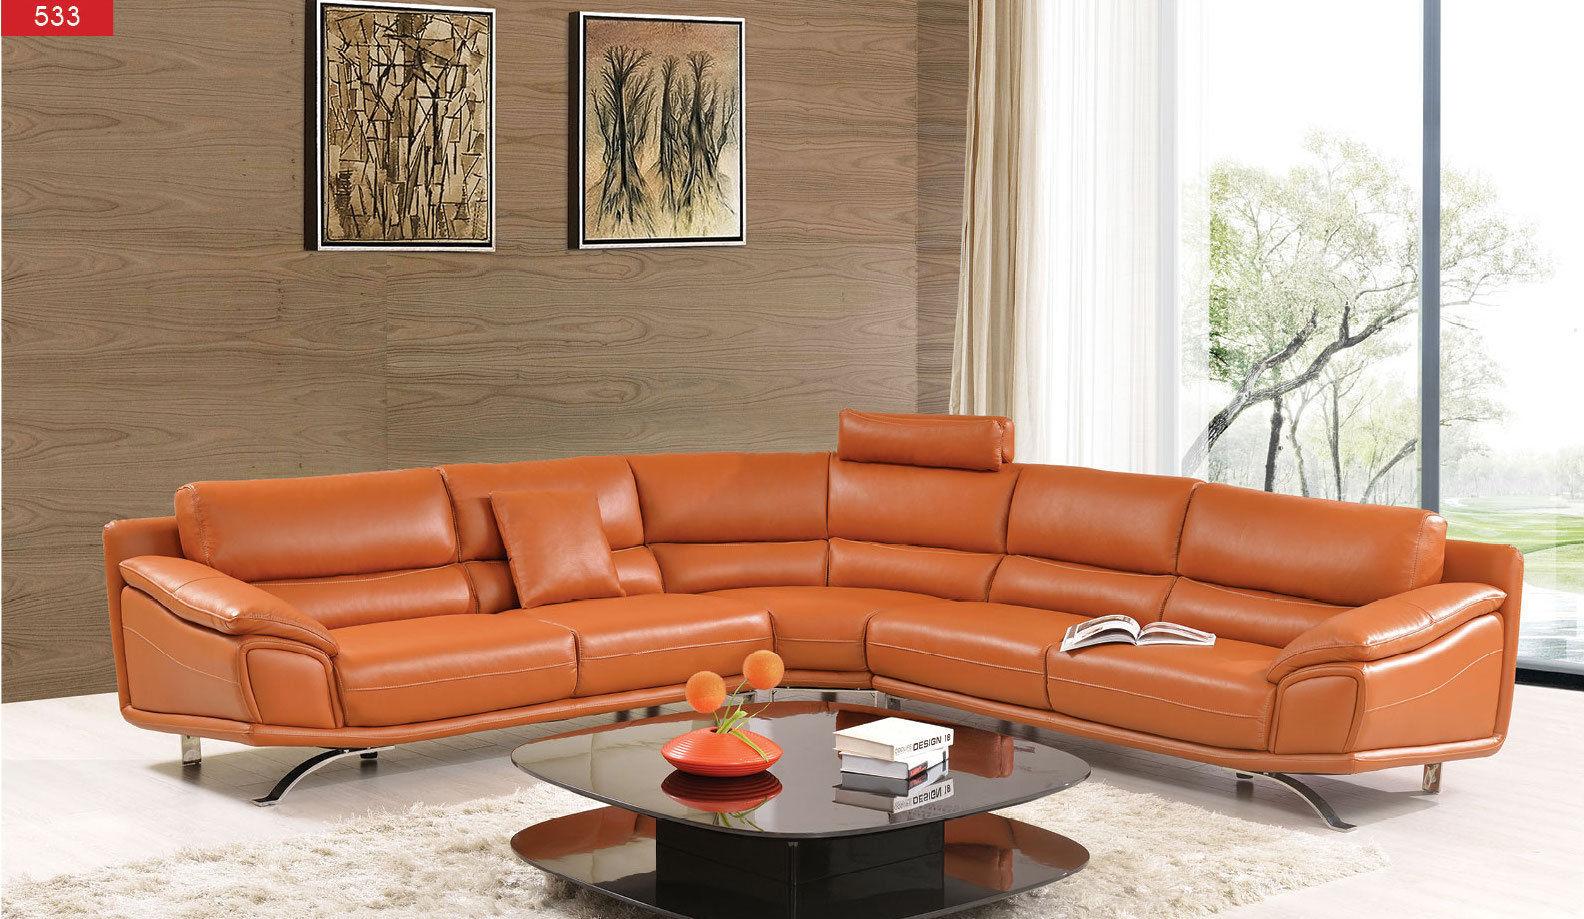 

    
Chic Orange Leather Sectional Sofa With Head Support Modern Contemporary ESF 533
